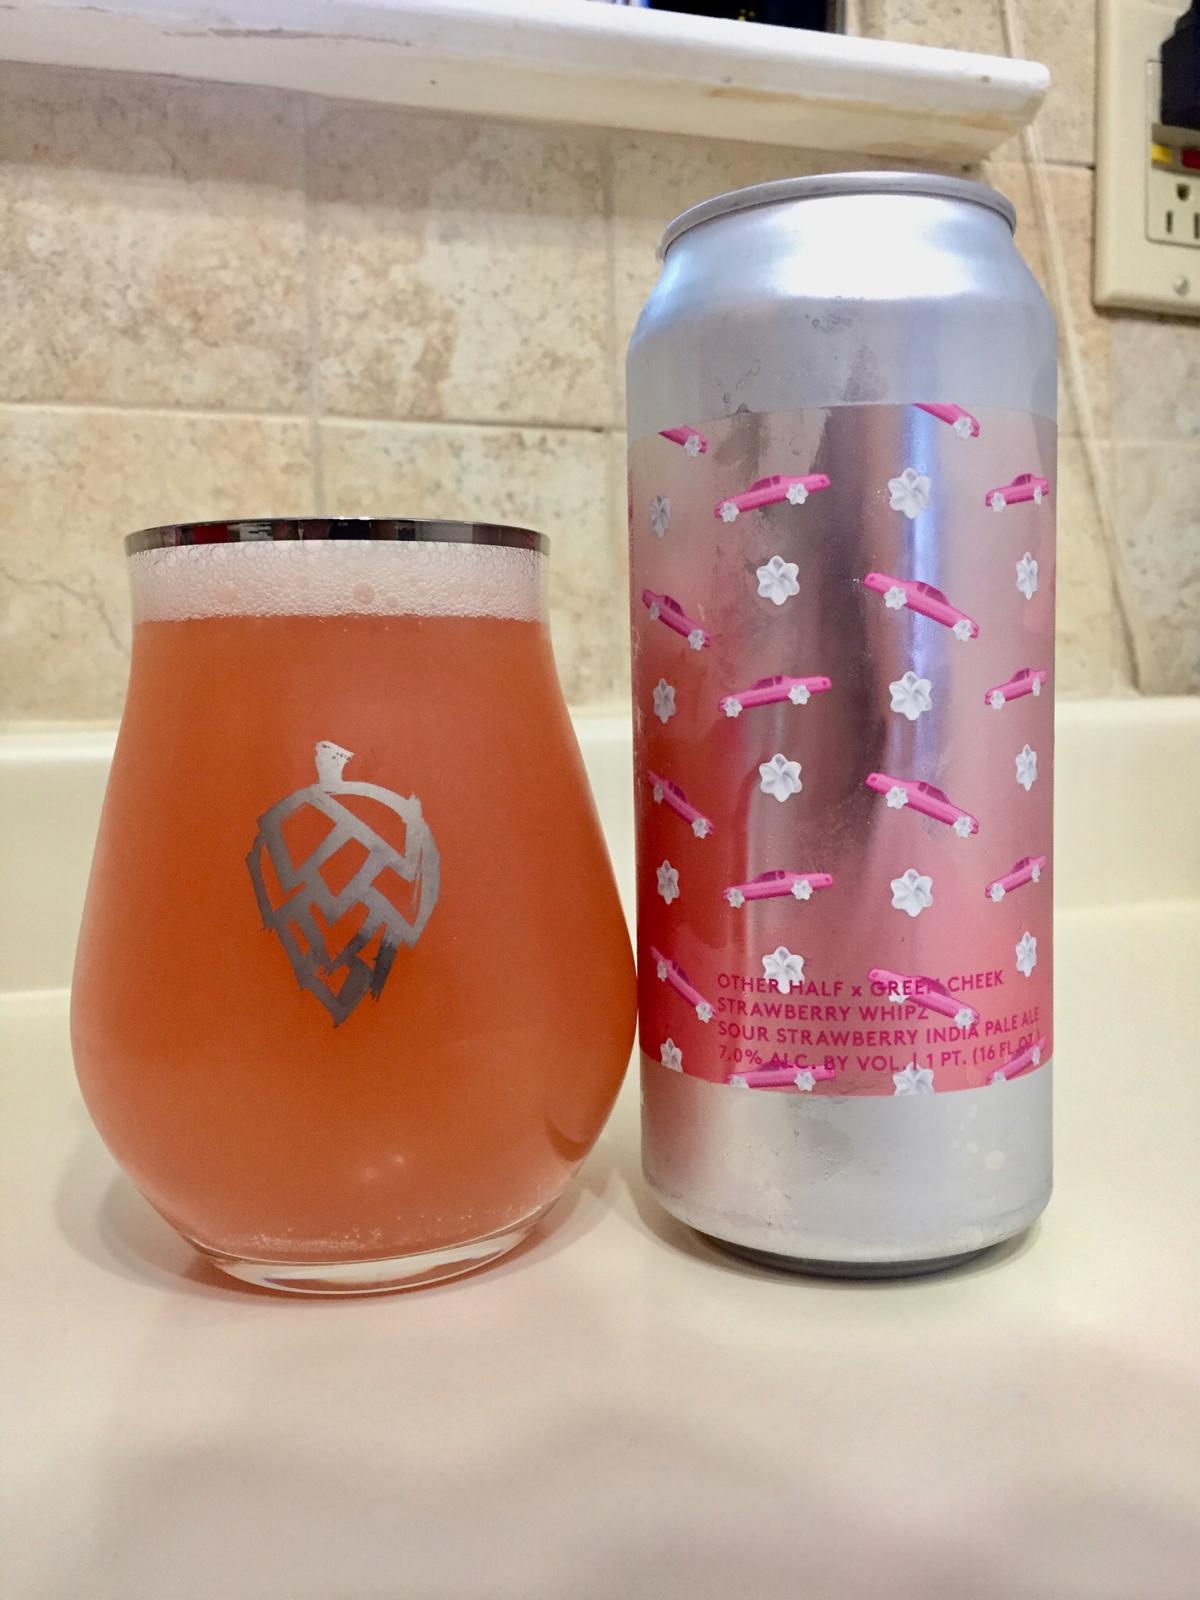 Strawberry Whipz (Collaboration with Green Cheek Beer Company)